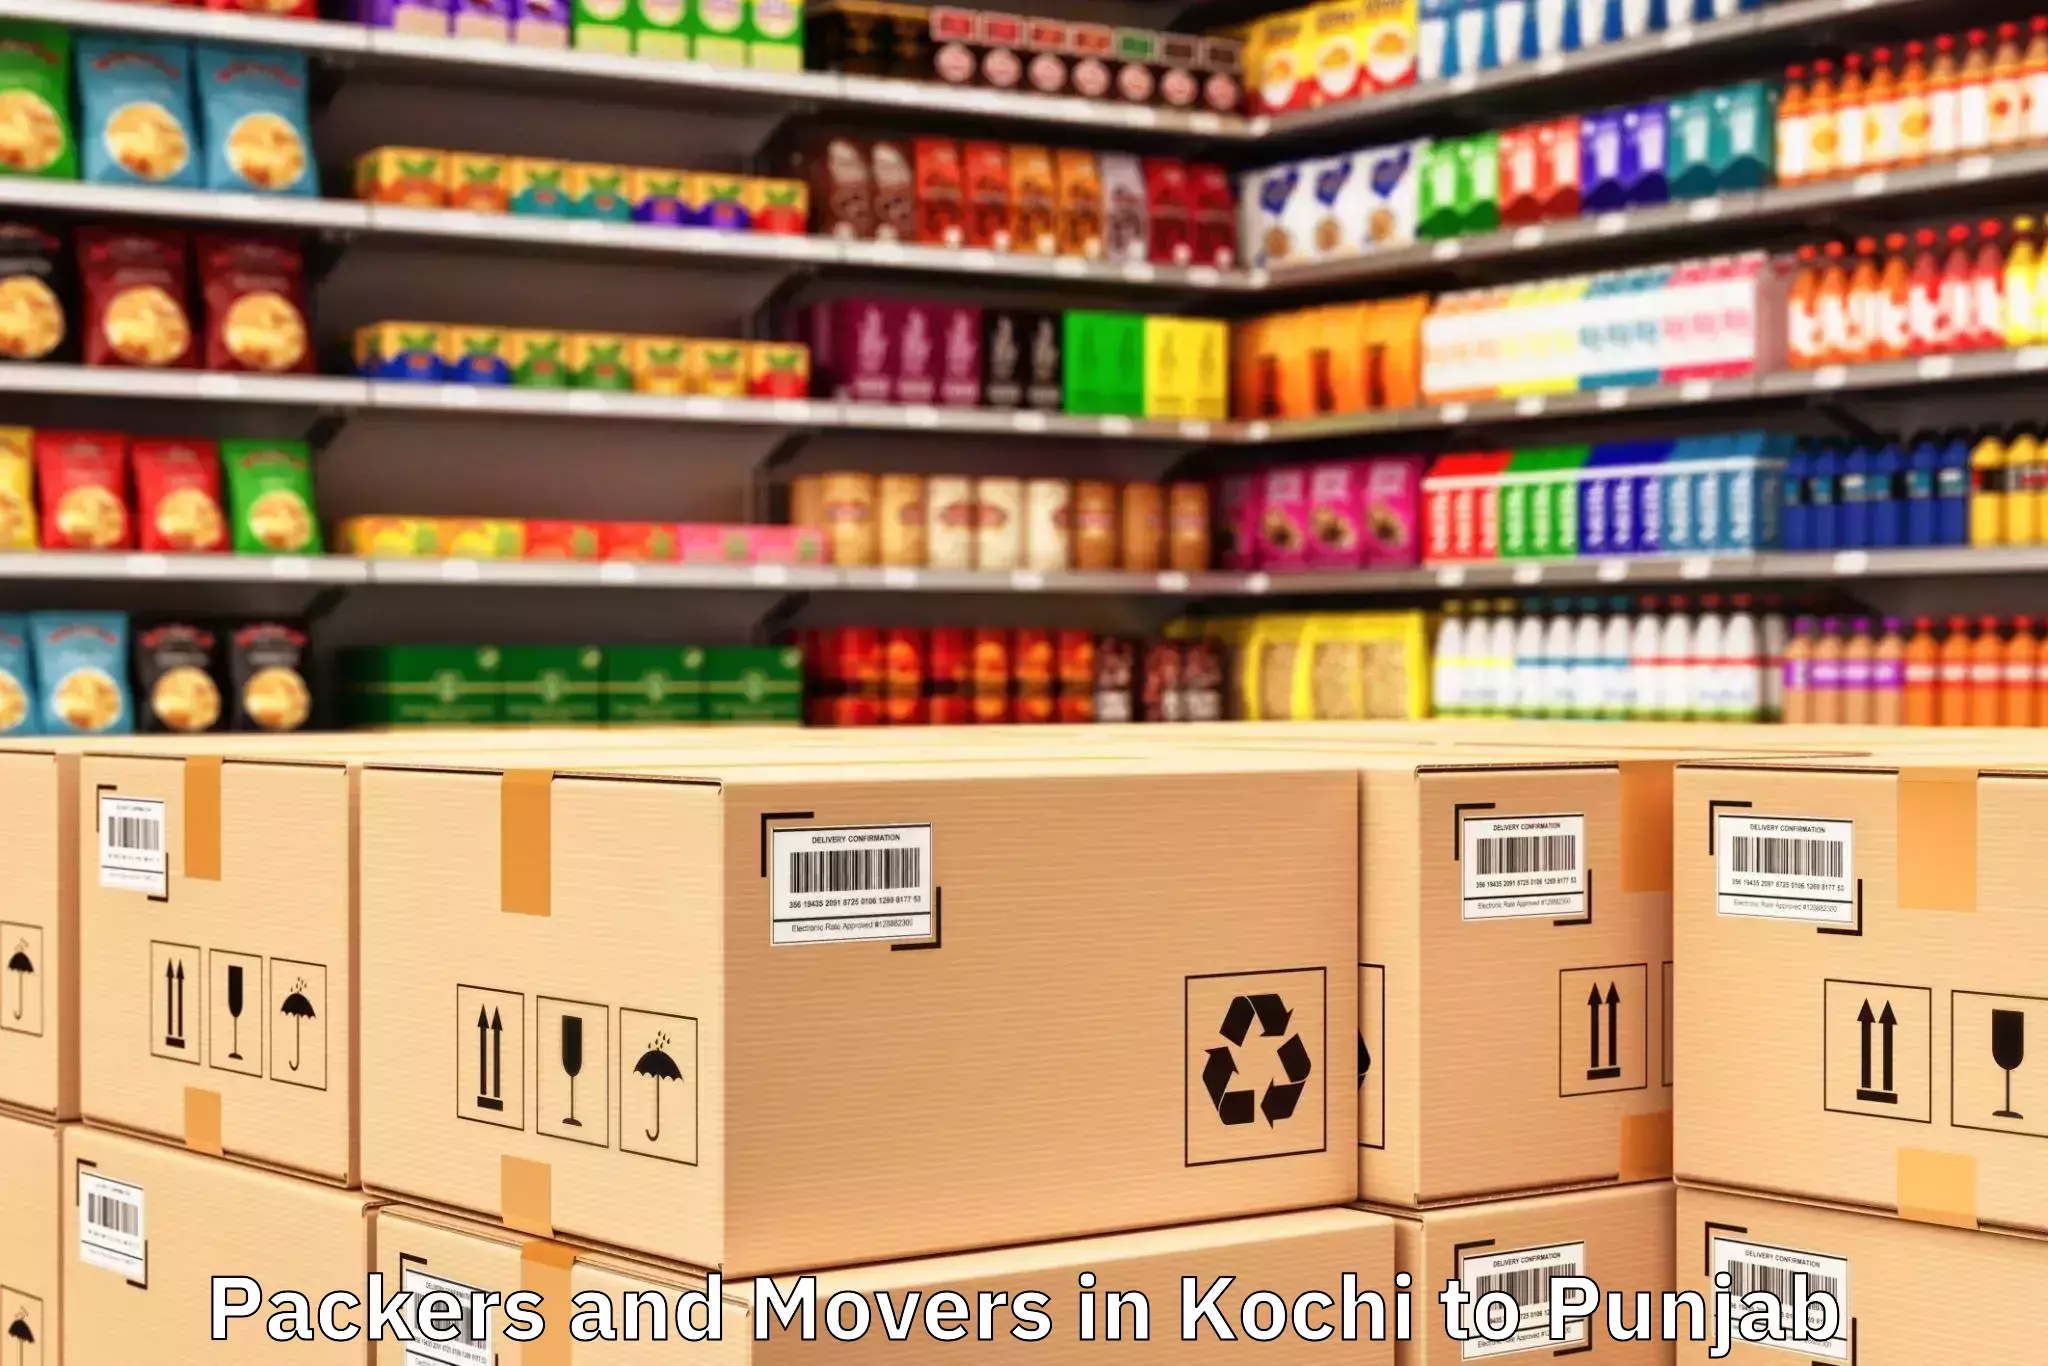 Expert Kochi to Punjab Packers And Movers